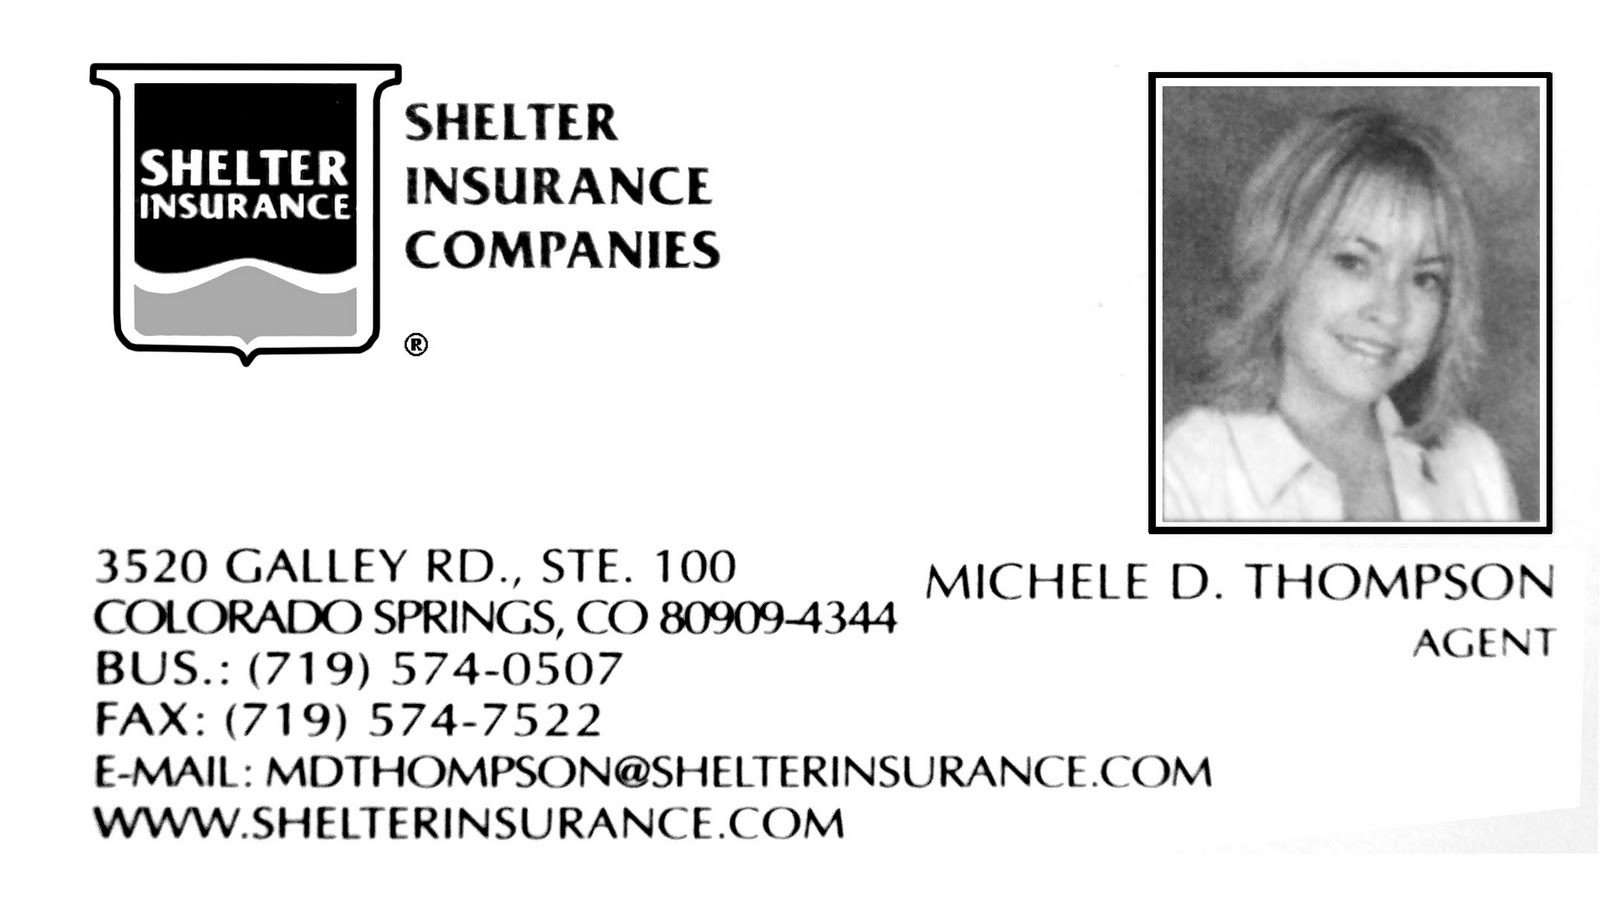 Shelter Insurance Claims Number File Liberty Mutual